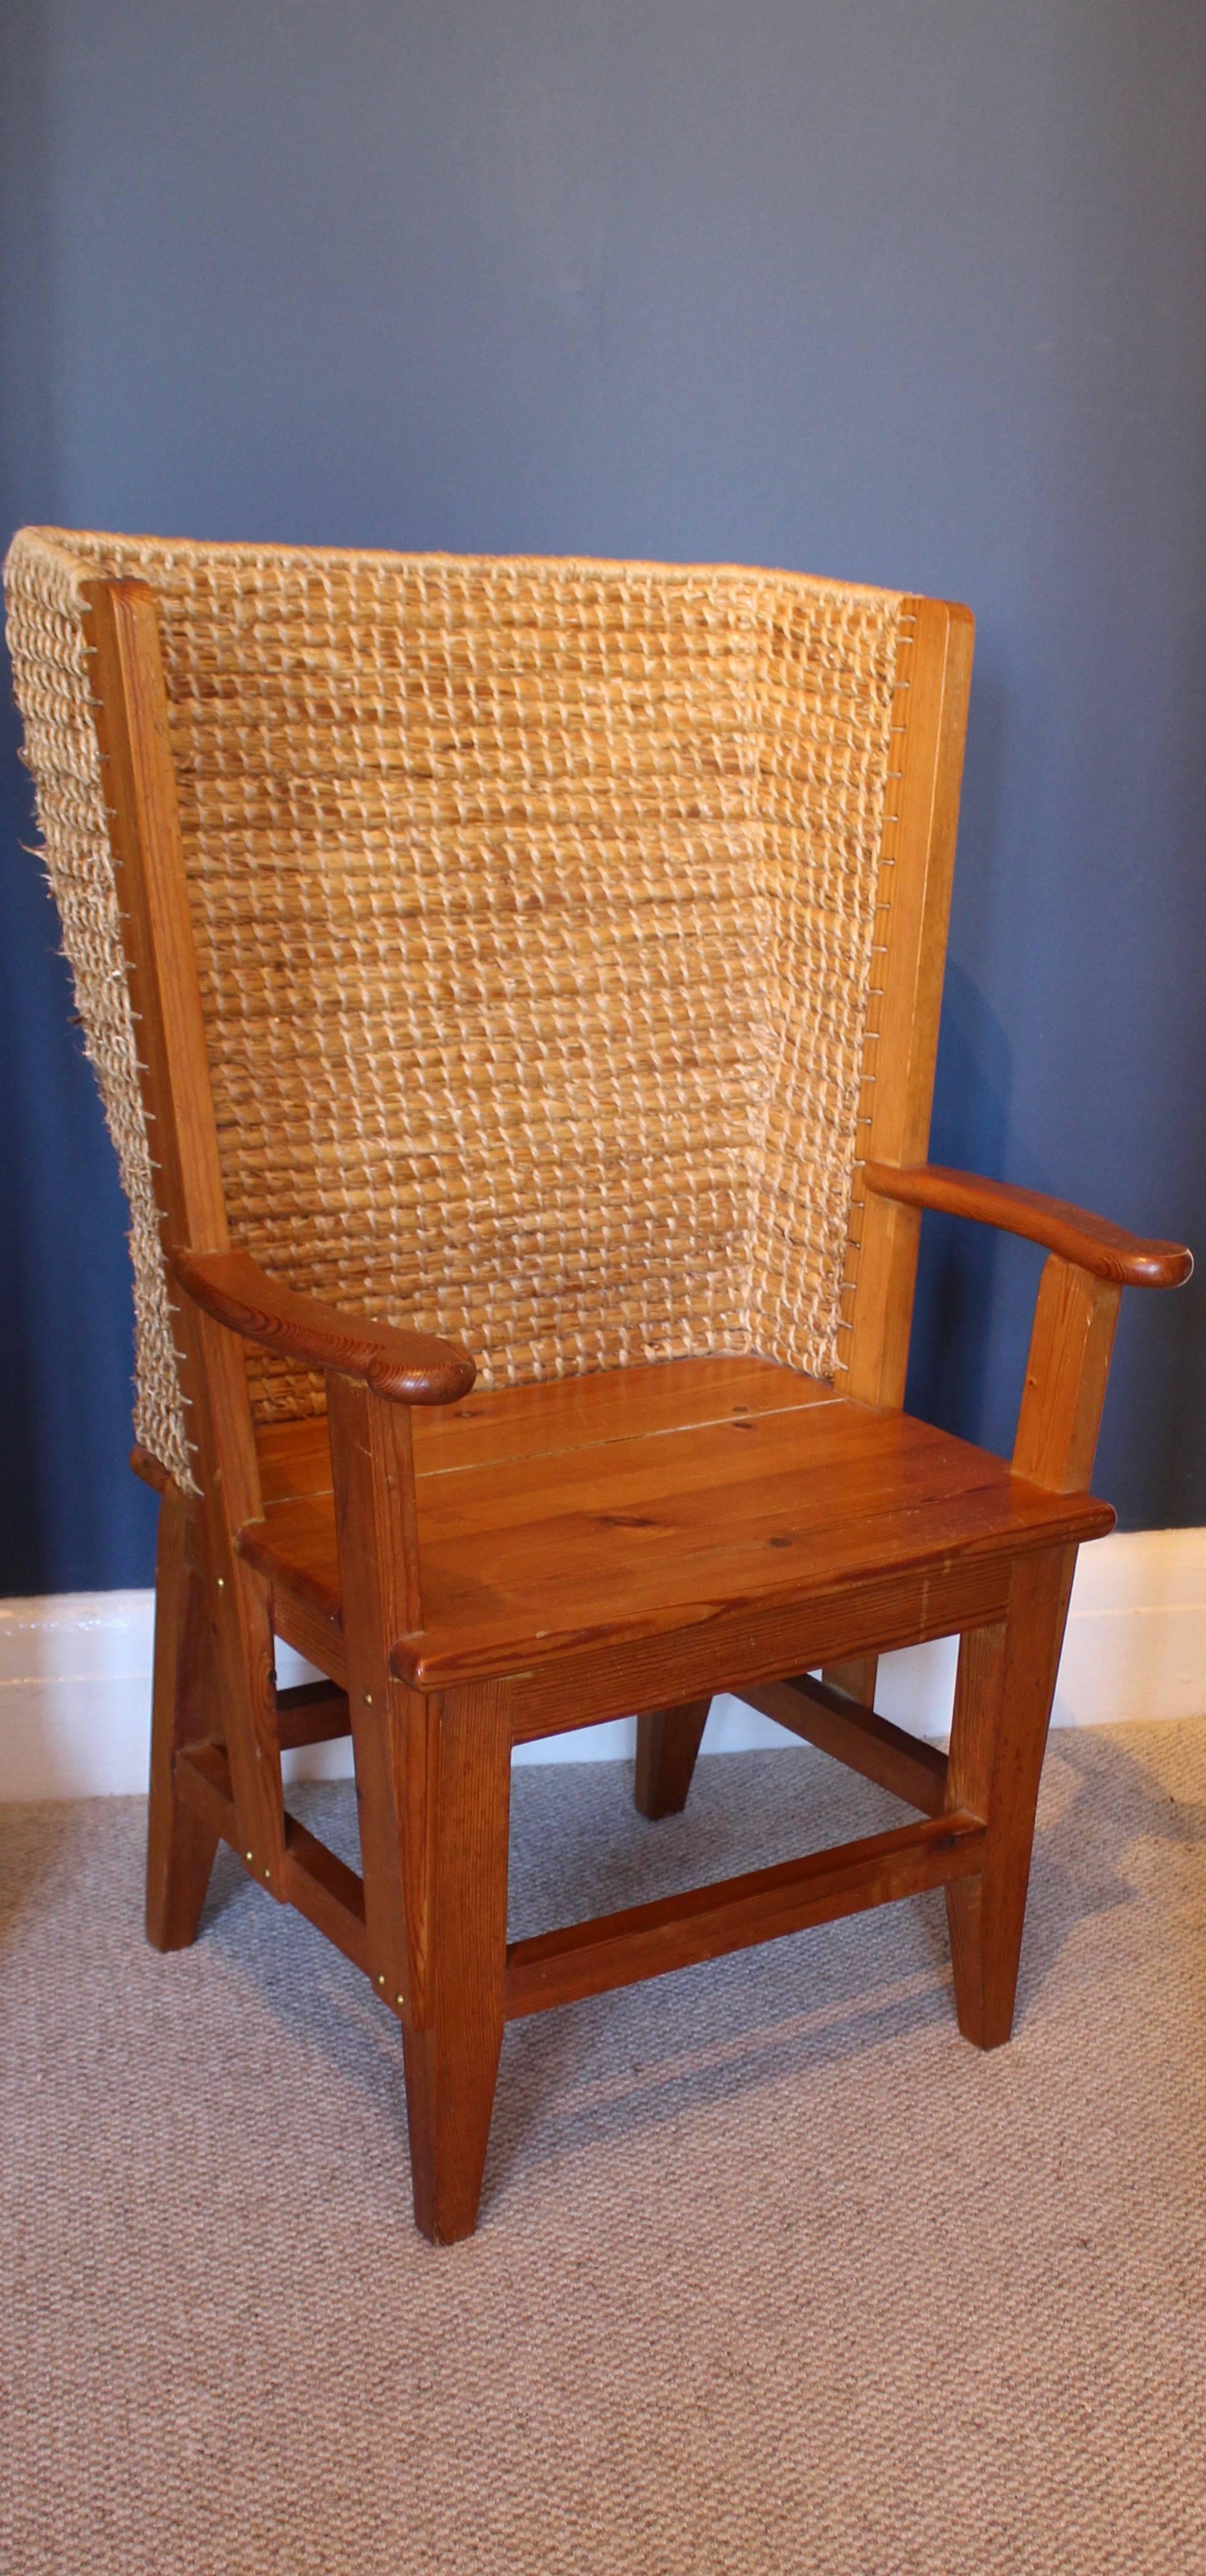 Rush Orkney Chair of Small Proportions in Pine and Straw, circa 1970